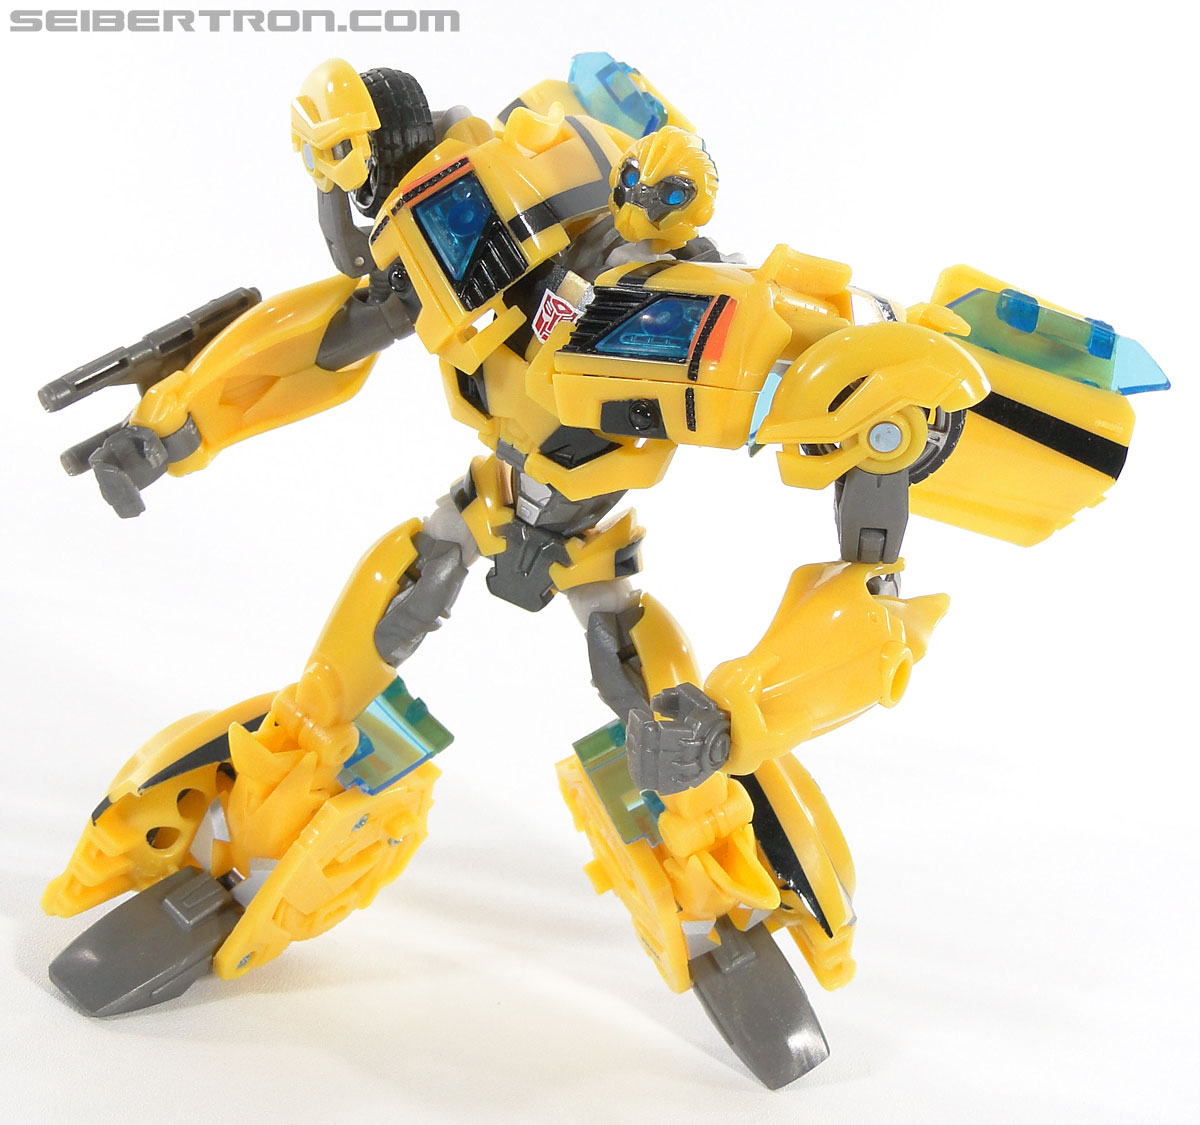 Transformers Prime: First Edition Bumblebee (Image #85 of 130)